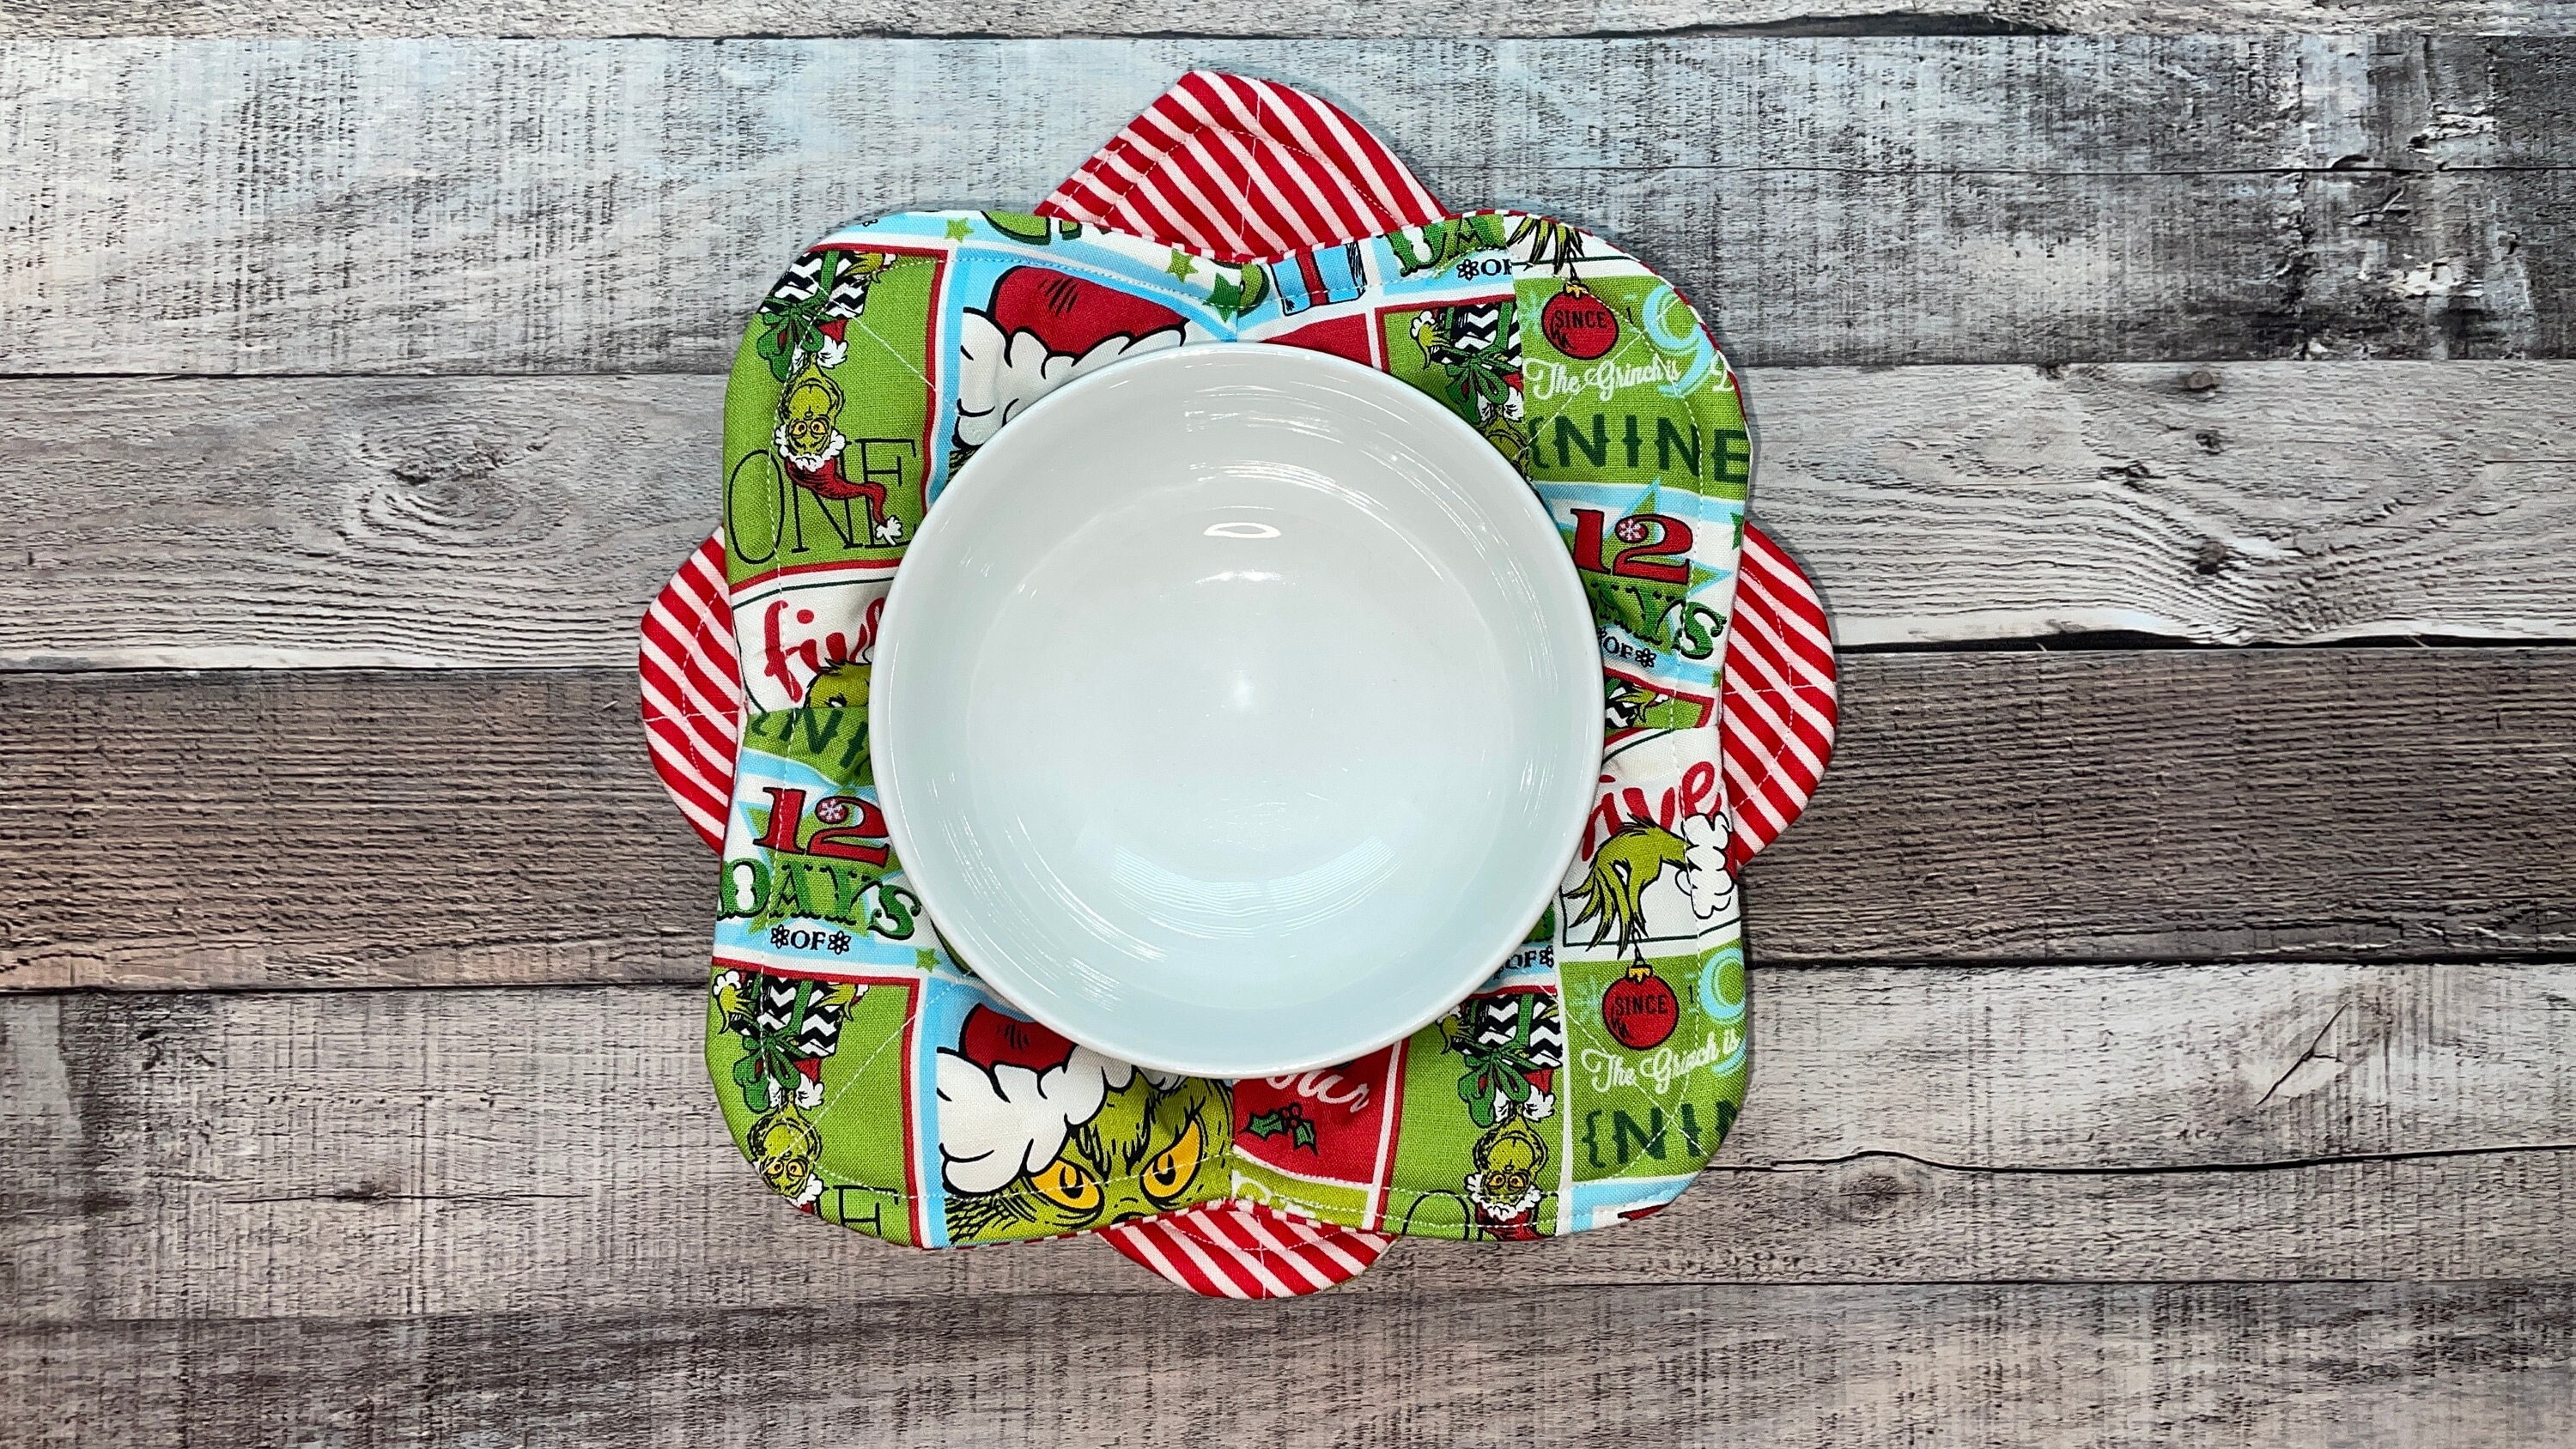 Grinch Bowl Cozies, Microwave Bowl, reversible, set of 2, microwave bowl  cozy, cotton, hot or cold bowl holder, Christmas, Dr Seuss